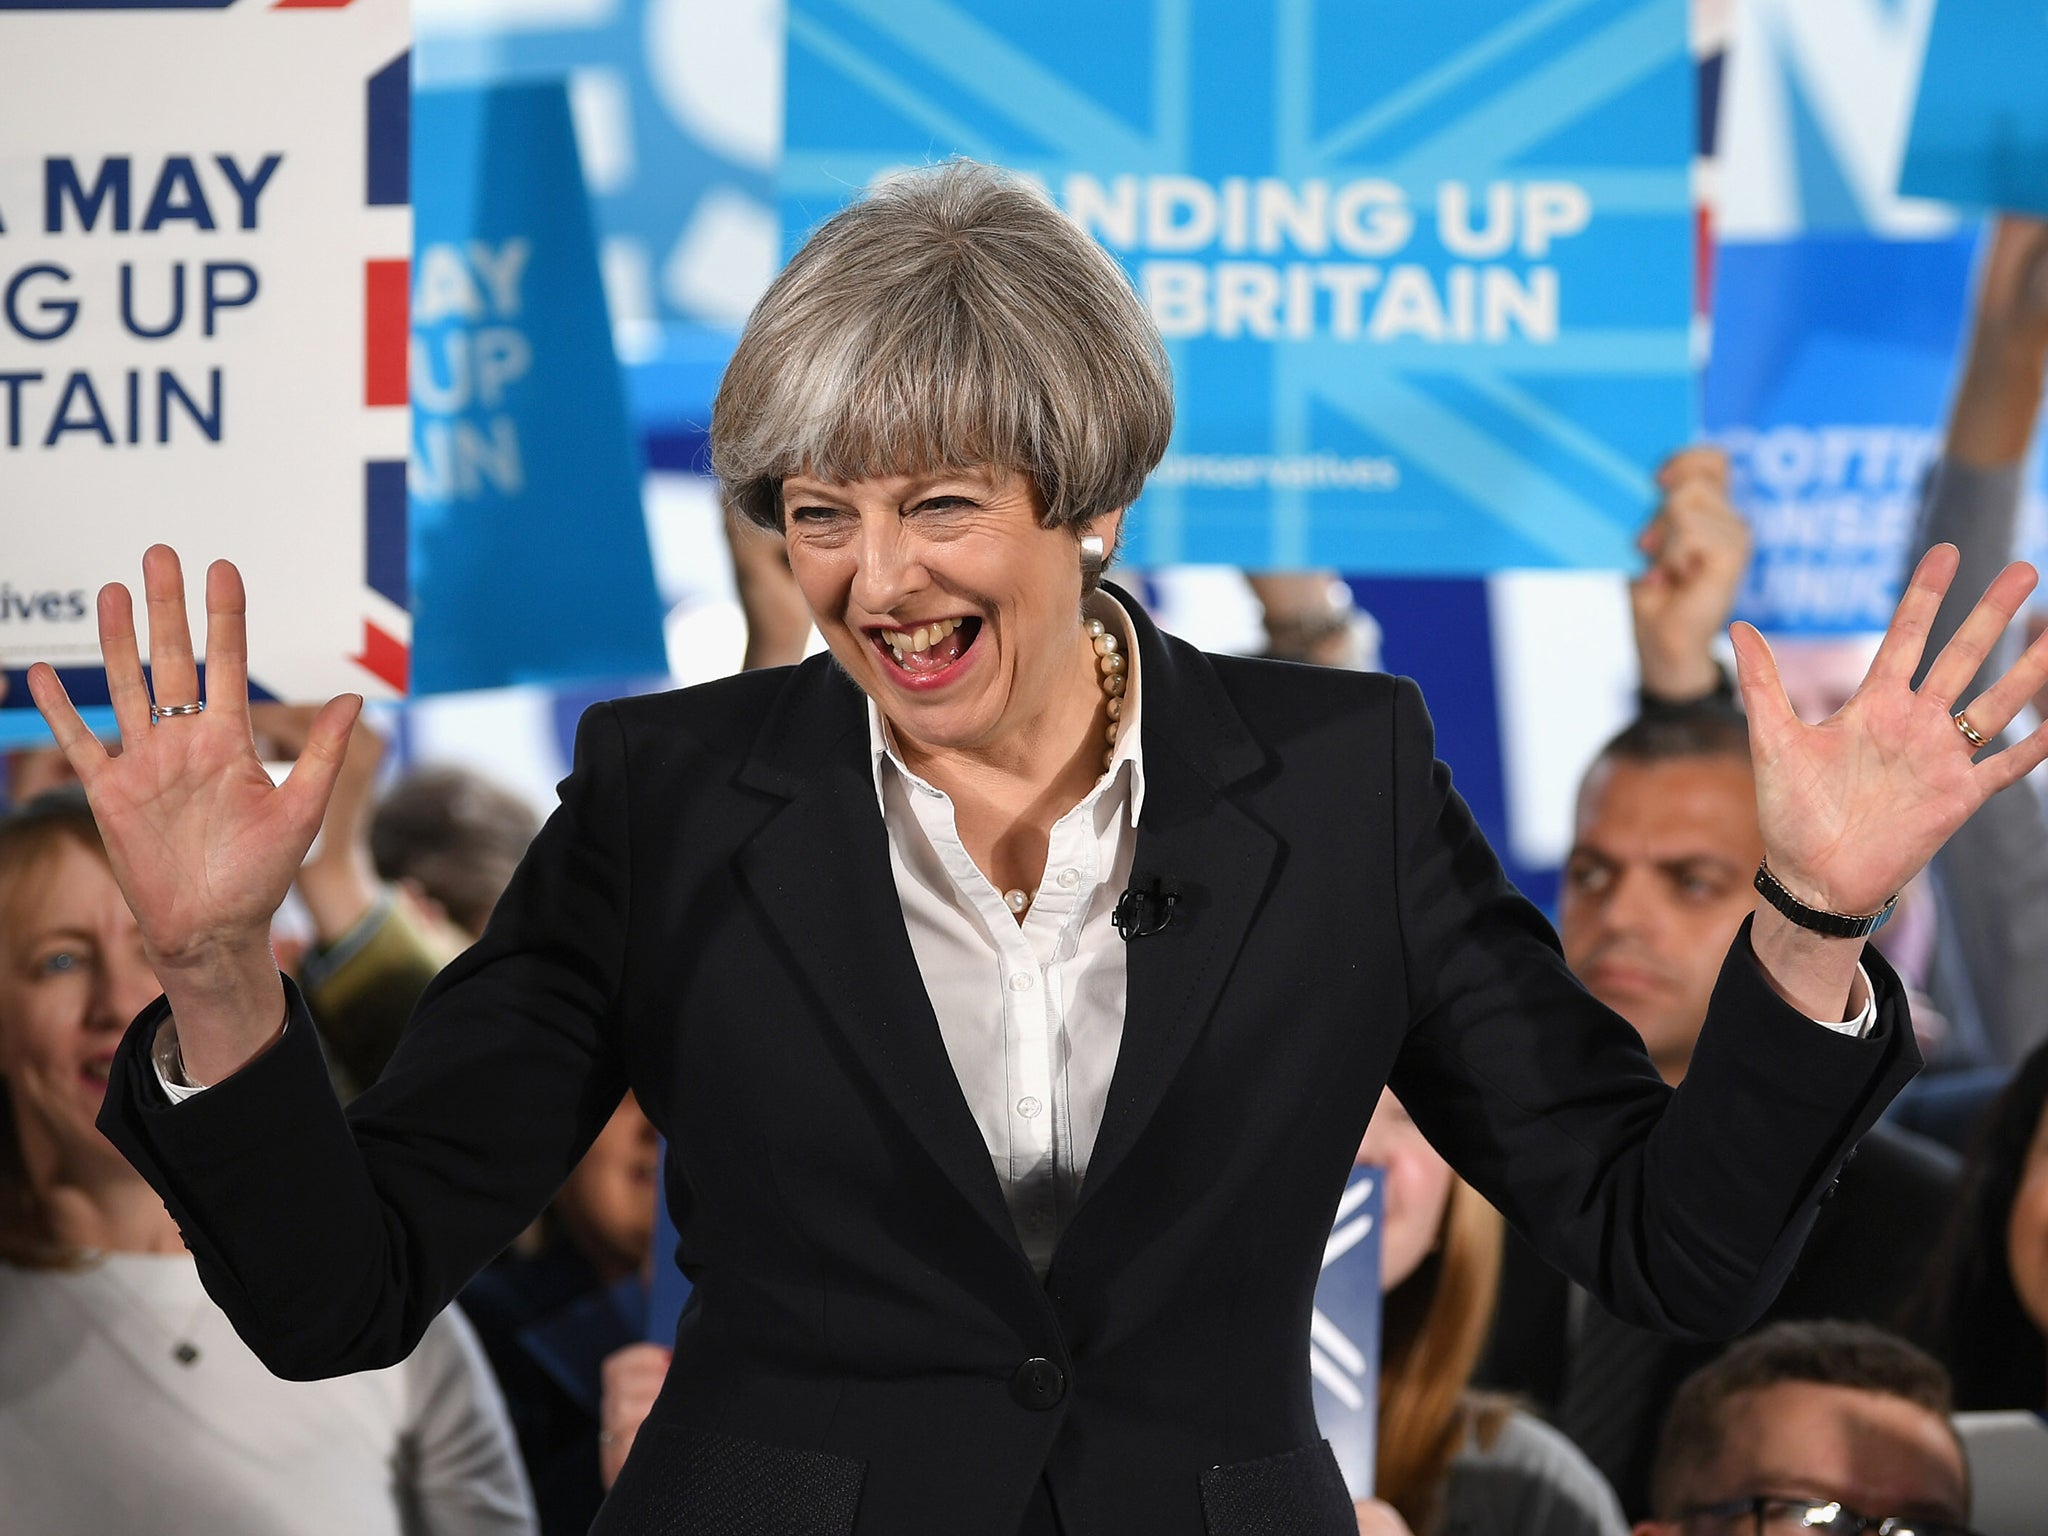 Theresa May on the campaign trail (Getty)